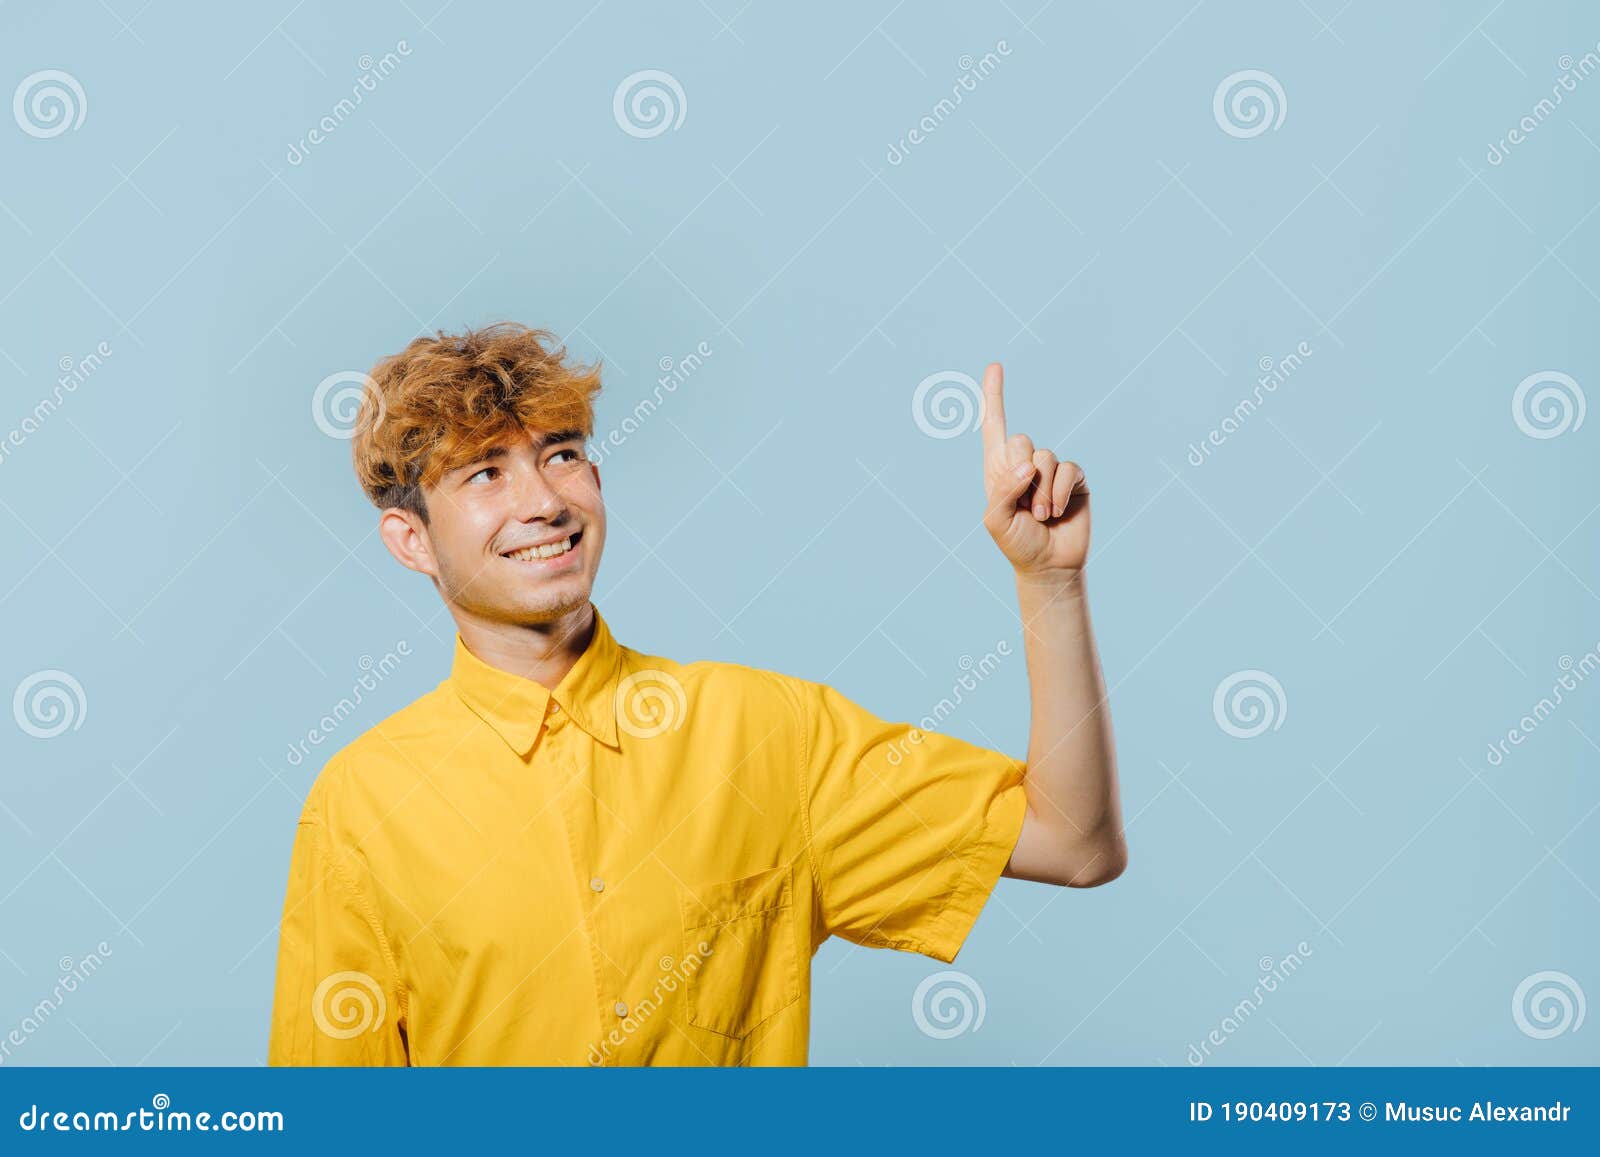 cheerful boy in yellow shirt pointing up direction on blue background,